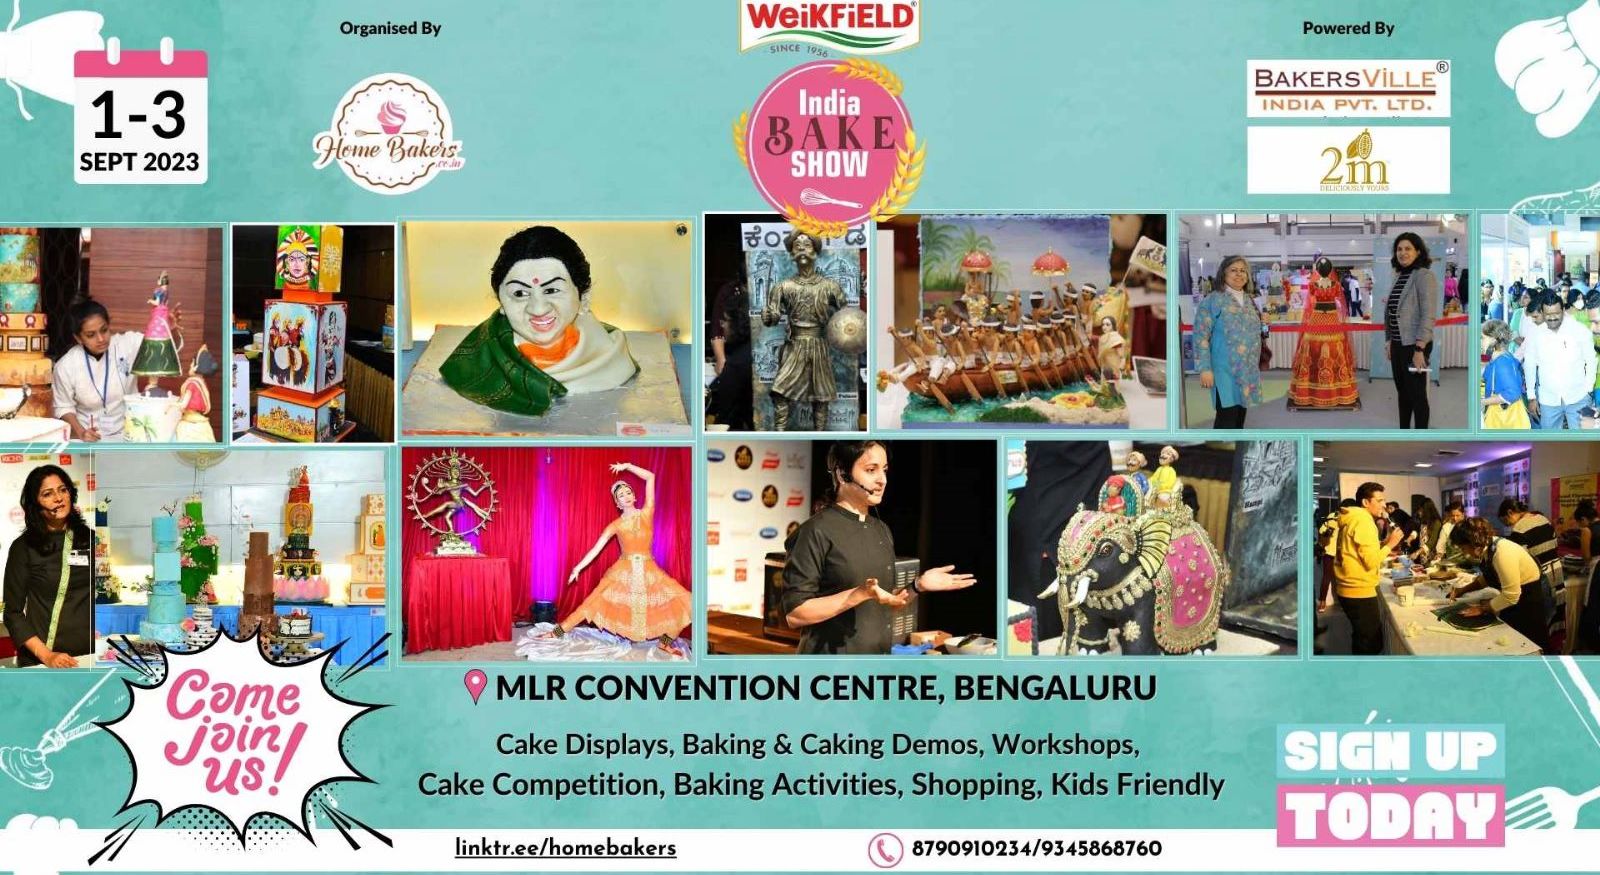 Mohan's Blog and Viewpoints: A visit to 43rd Annual Cake Show, Bengaluru  2017